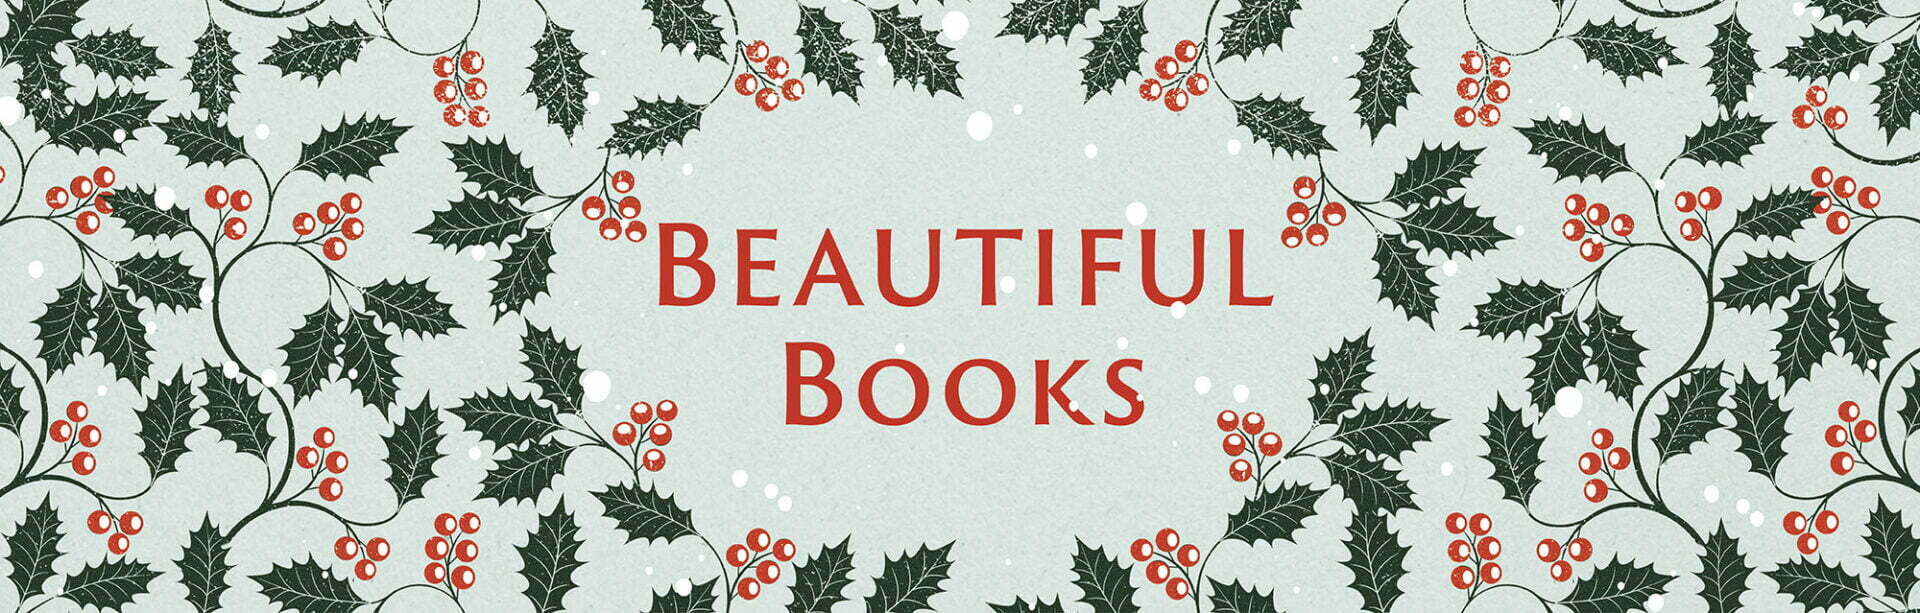 https://faber.wp.dev.diffusion.digital/wp-content/uploads/2021/11/Faber-Christmas-Gift-Guide-Beautiful-Reads-1920x613.jpg